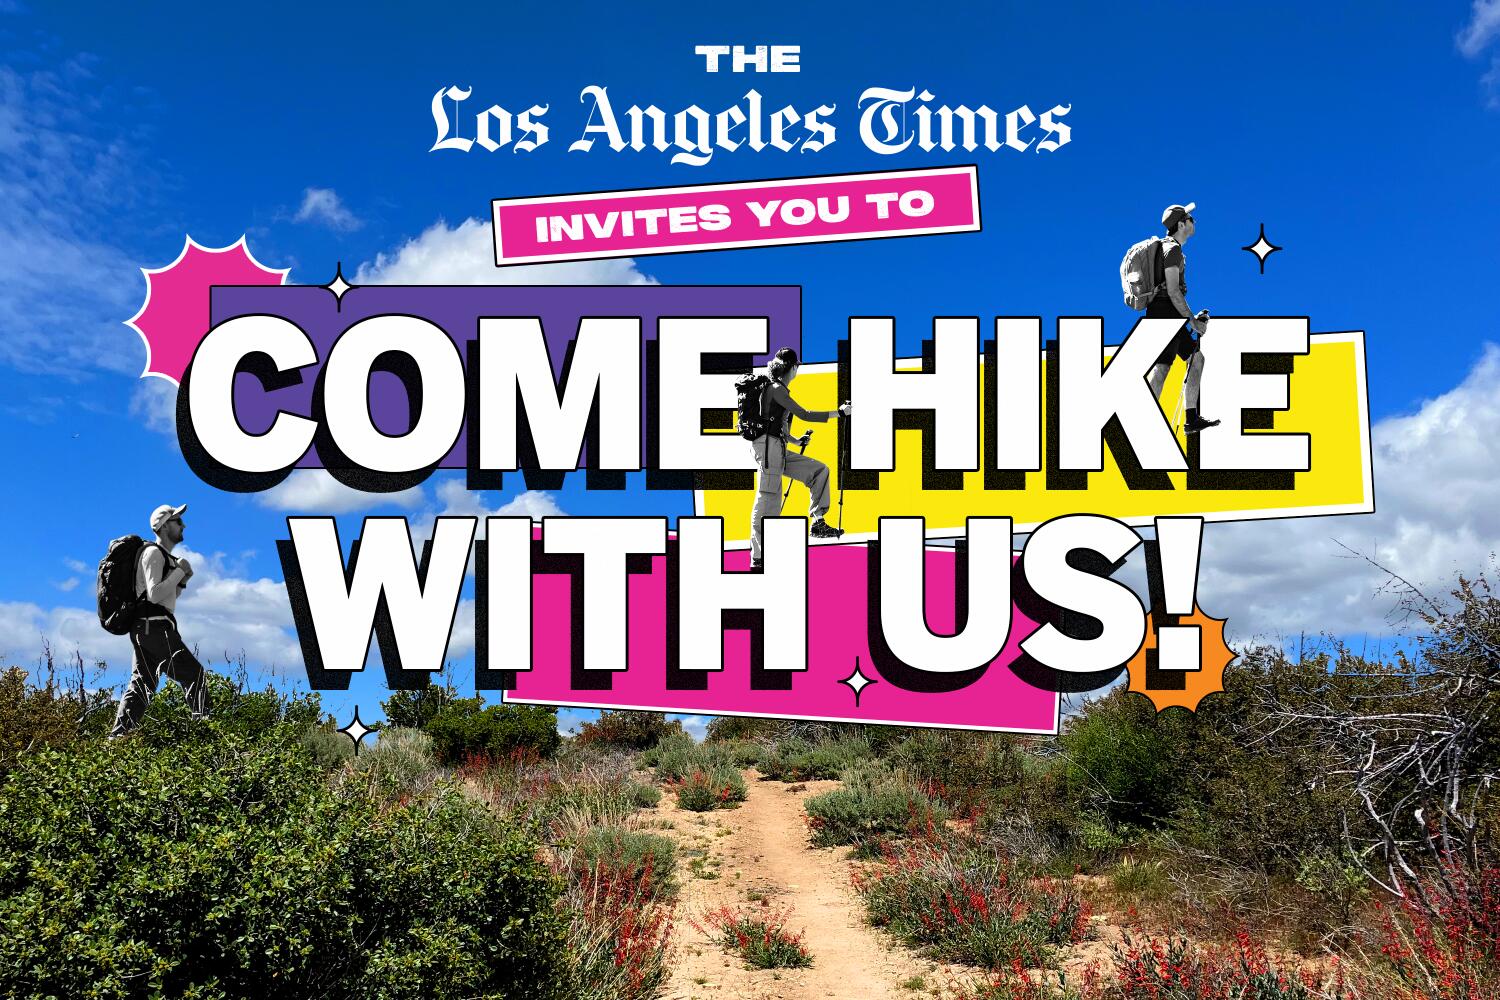 ?url=https%3A%2F%2Fcalifornia times brightspot.s3.amazonaws.com%2F1c%2Ff6%2Faed7545f4ae7a8307c8d4ab5f121%2Fhiking event come hike with us